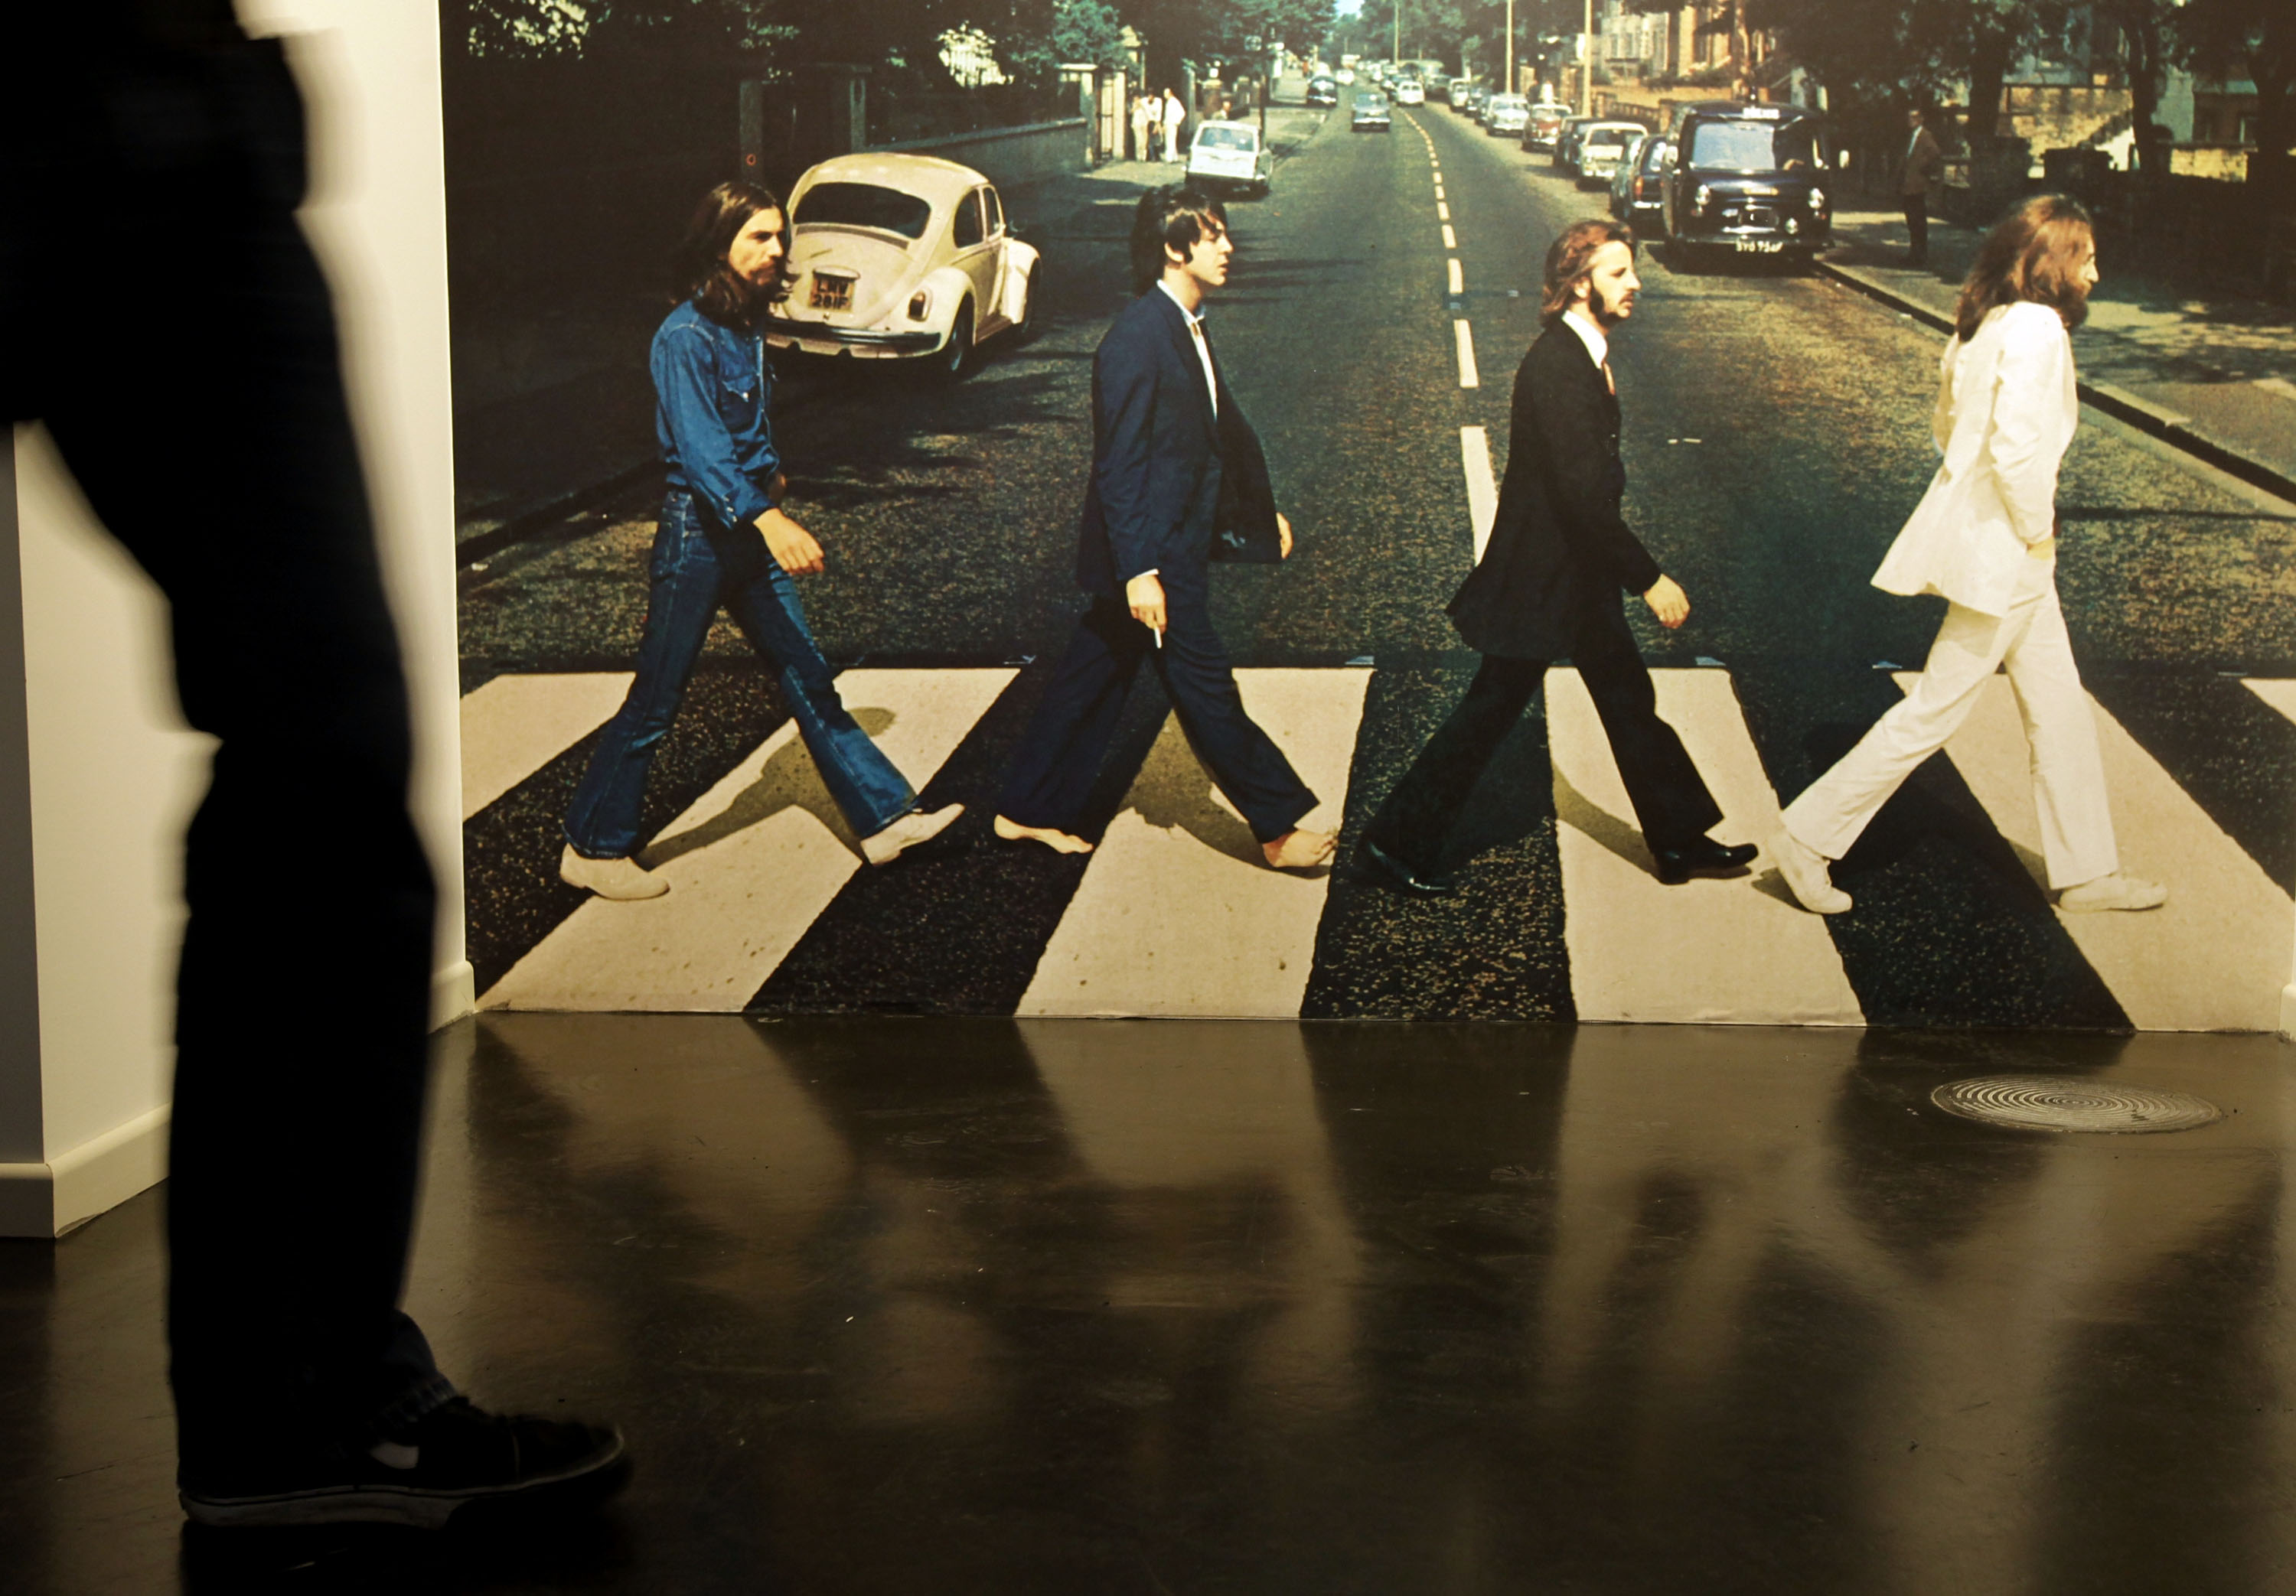 Abbey Road - The Abbey Road album cover is possibly the most famous photo of the Beatles there is, but it was actually doctored a little. US poster companies removed the cigarette from Paul’s hand—without his or Apple Records’ (who own the rights to the image) permission.